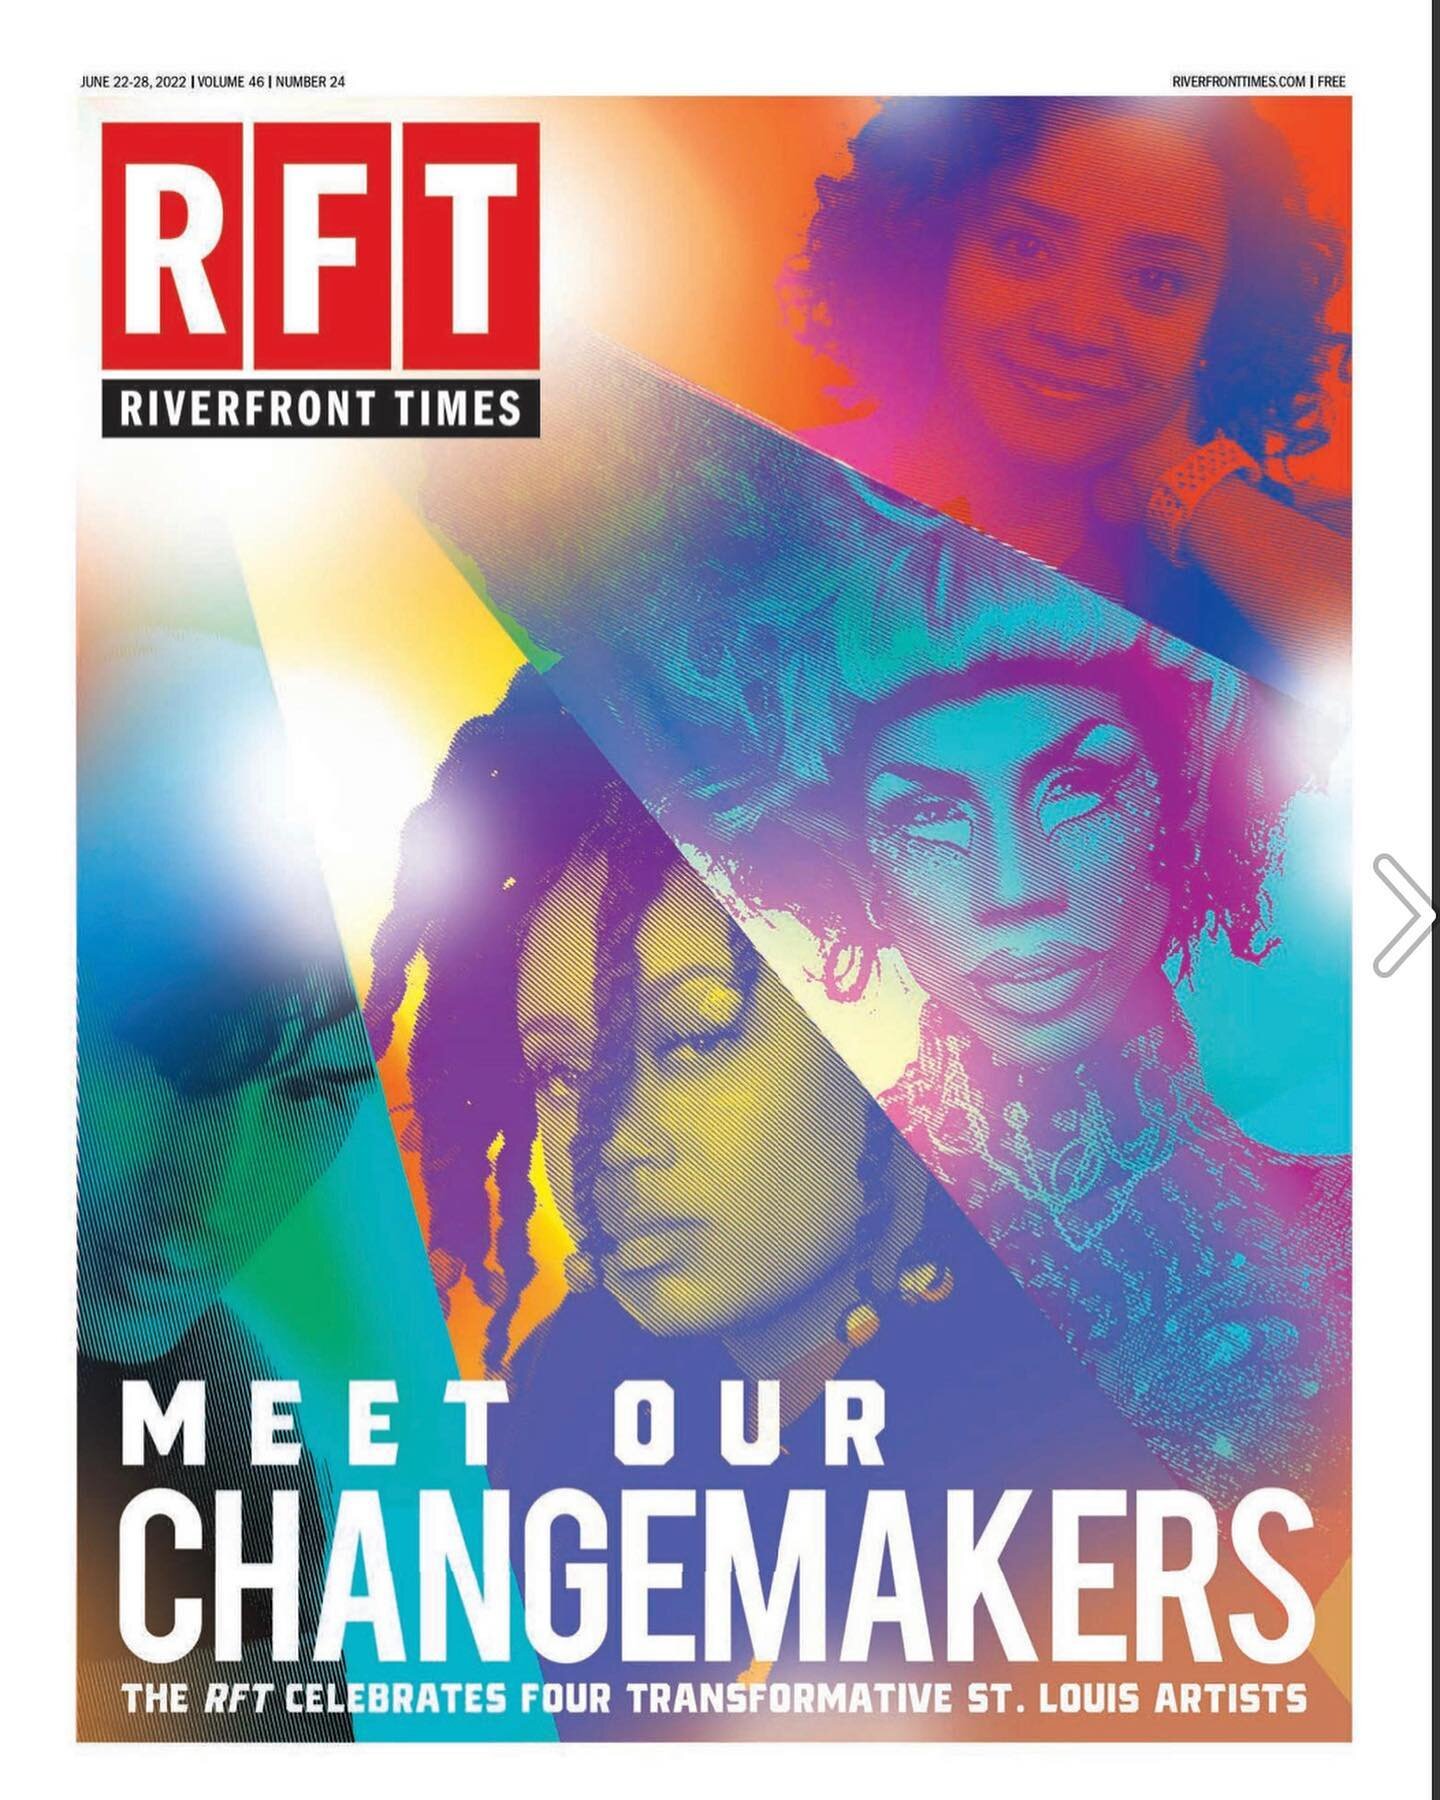 I am HONORED to be named a ChangeMaker by the @riverfronttimes ! 

Music has been a lifesaving force in my life. Being able to tell my story and create community is my reason for being and this ChangMaker grant is definitely going to help me create t